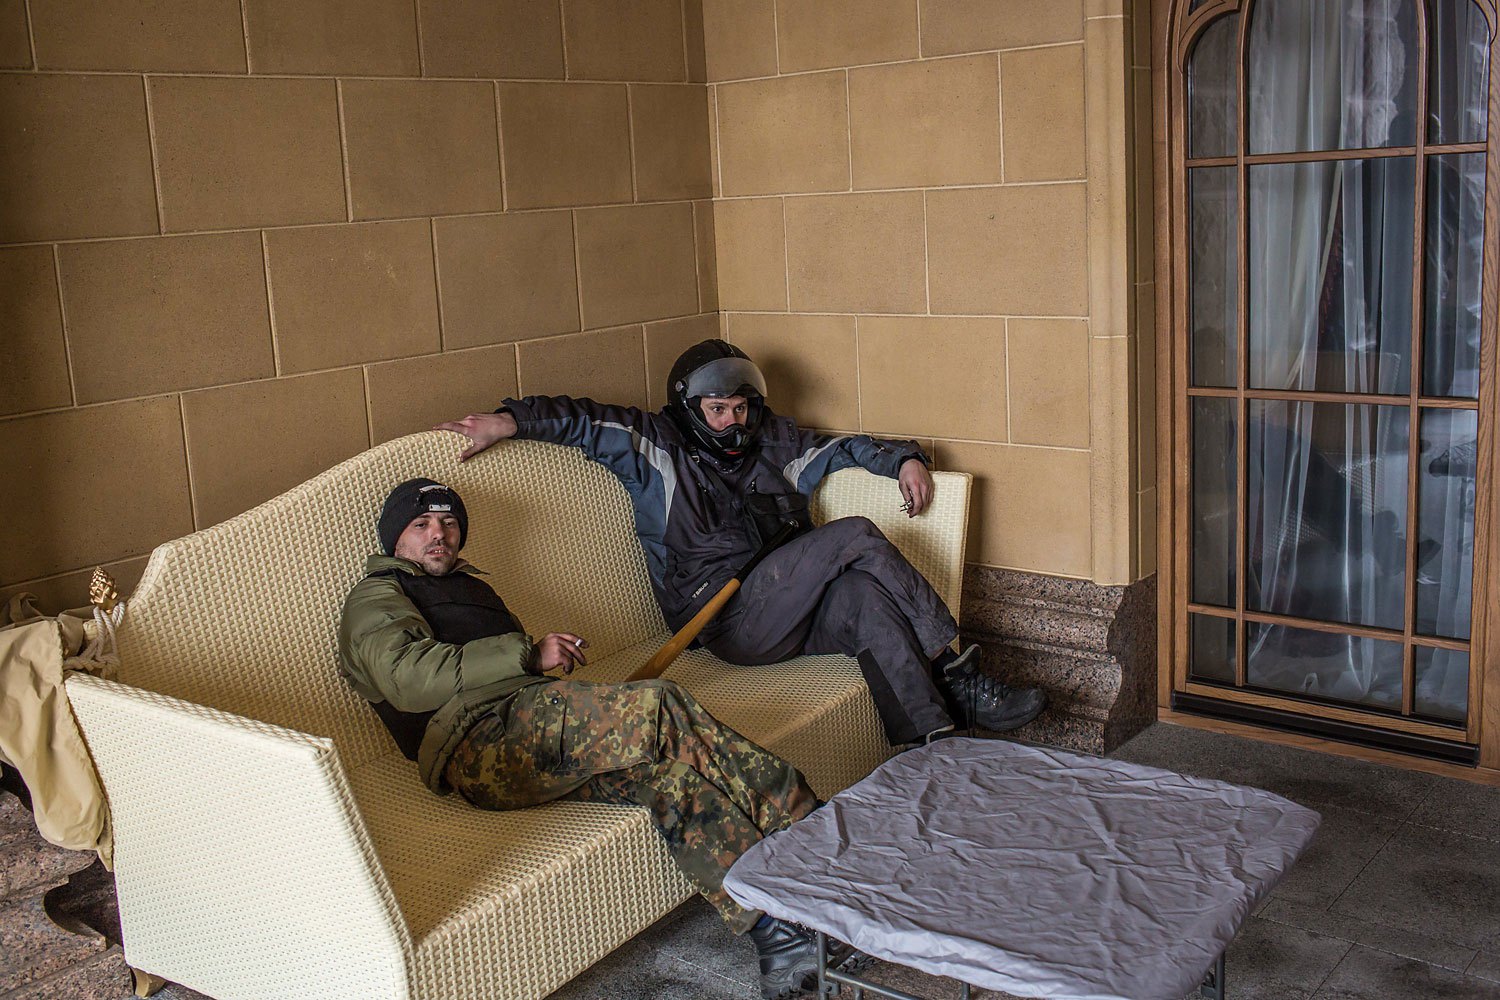 Anti-government protesters sit on a couch on a back patio.